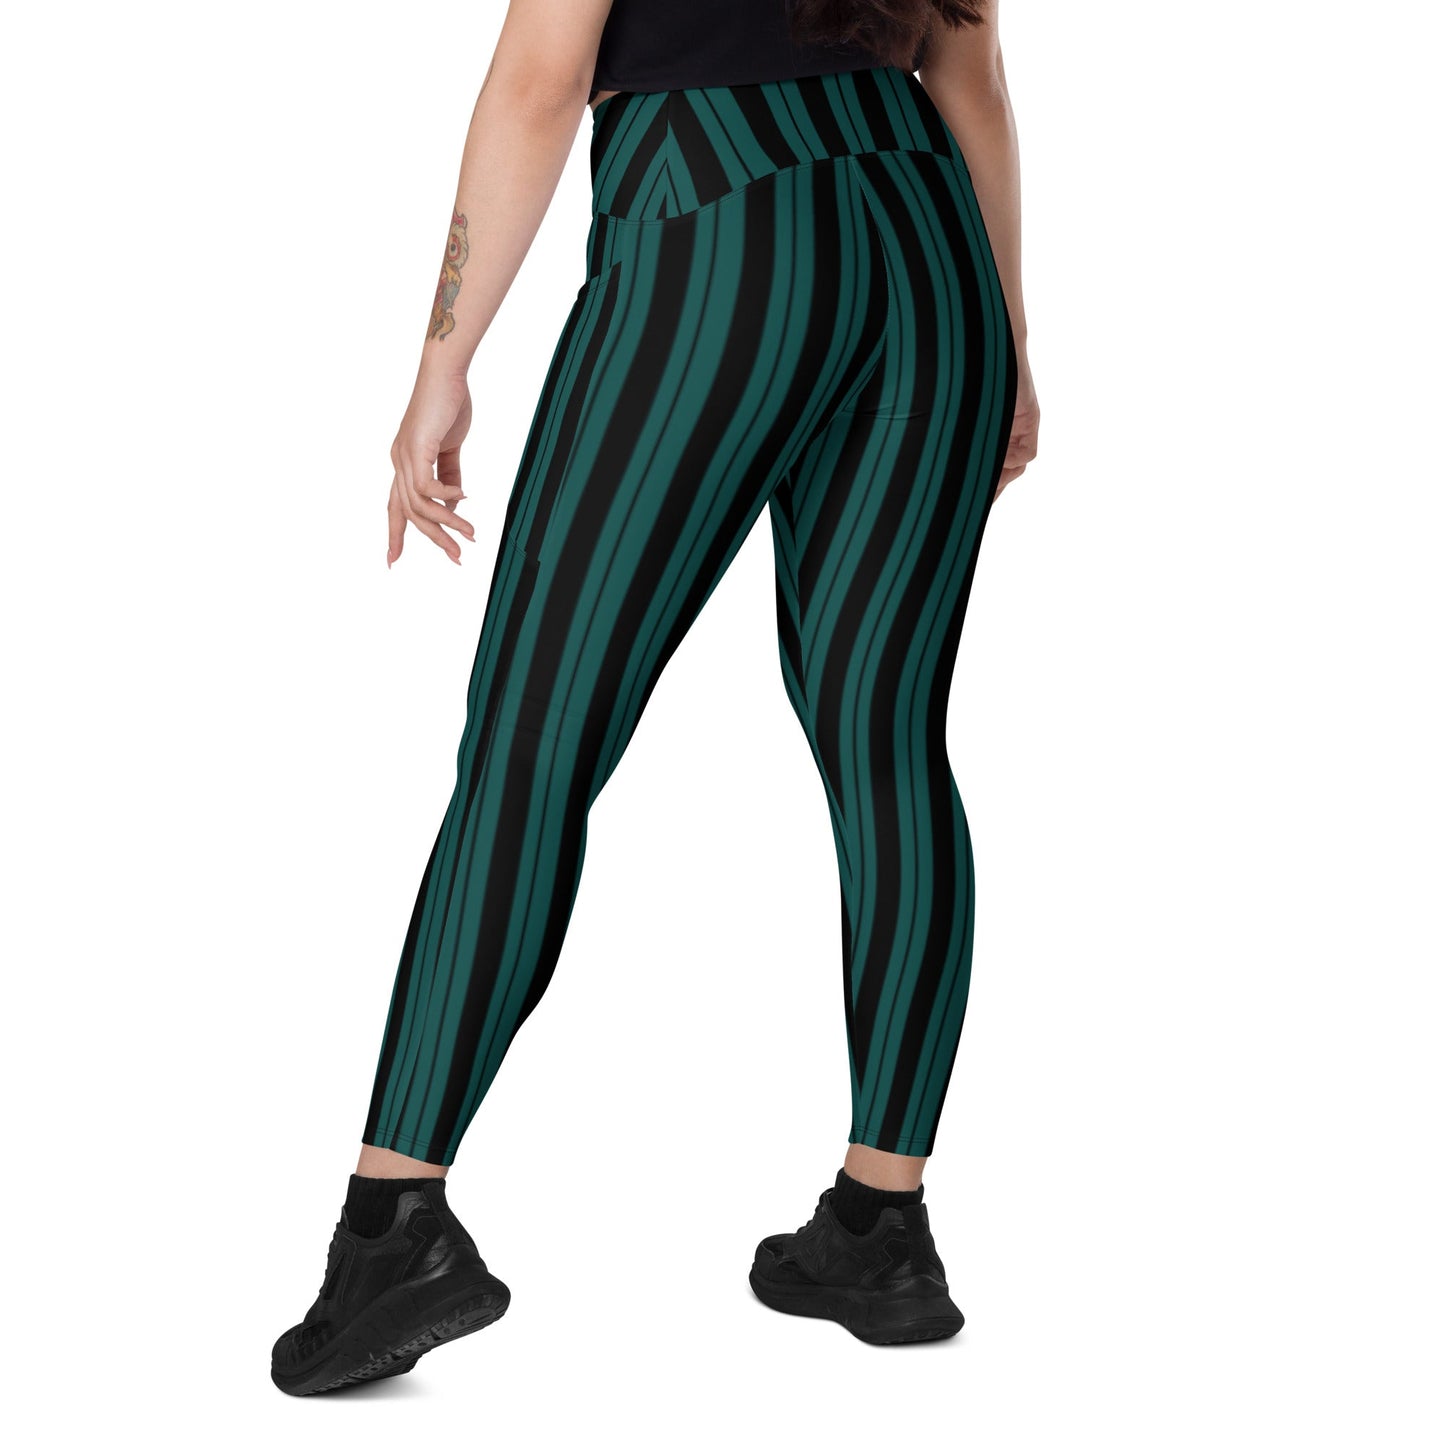 Ghost Host Leggings with pockets cast membercast member stylecostume#tag4##tag5##tag6#